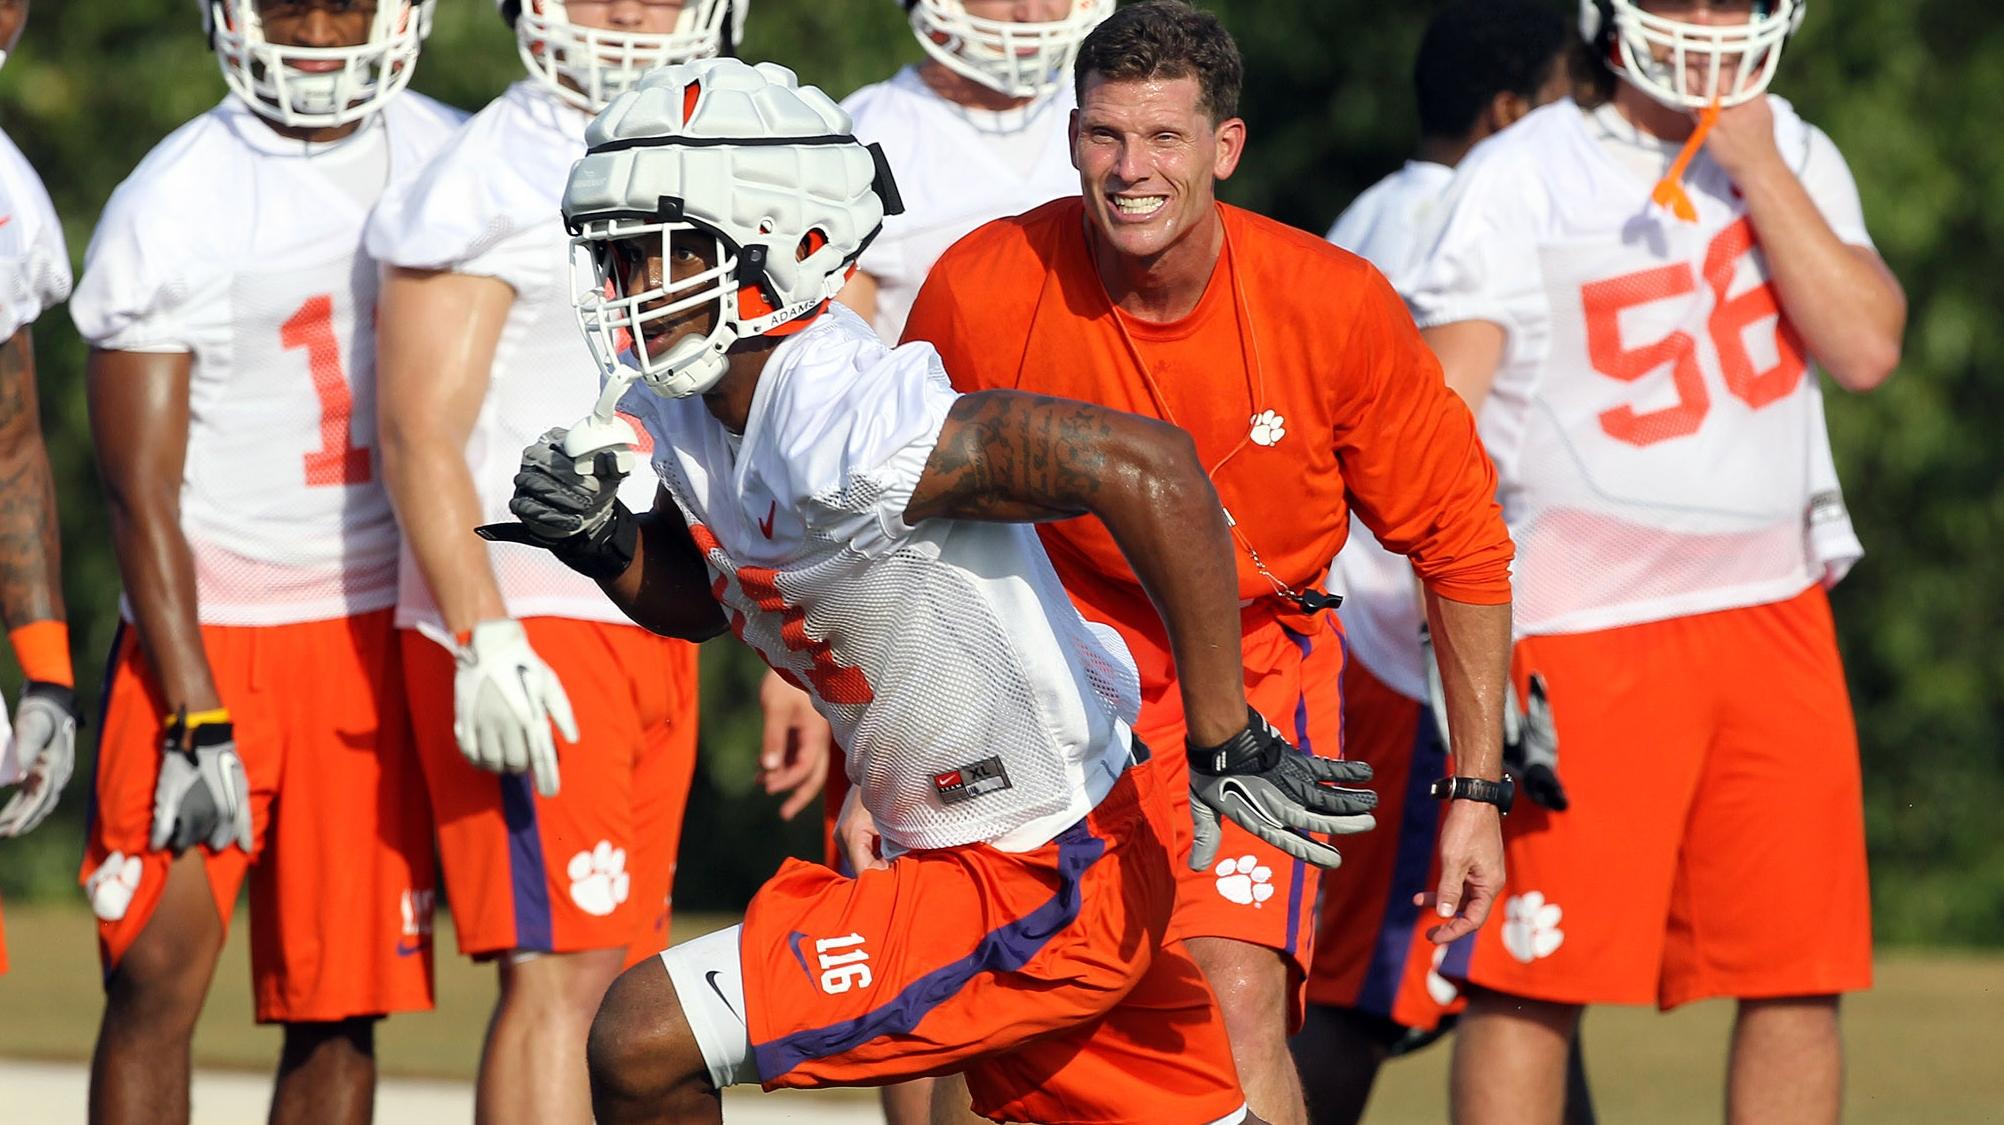 EXCLUSIVE: Tigers Focused On Task at Hand as Fall Camp Opens